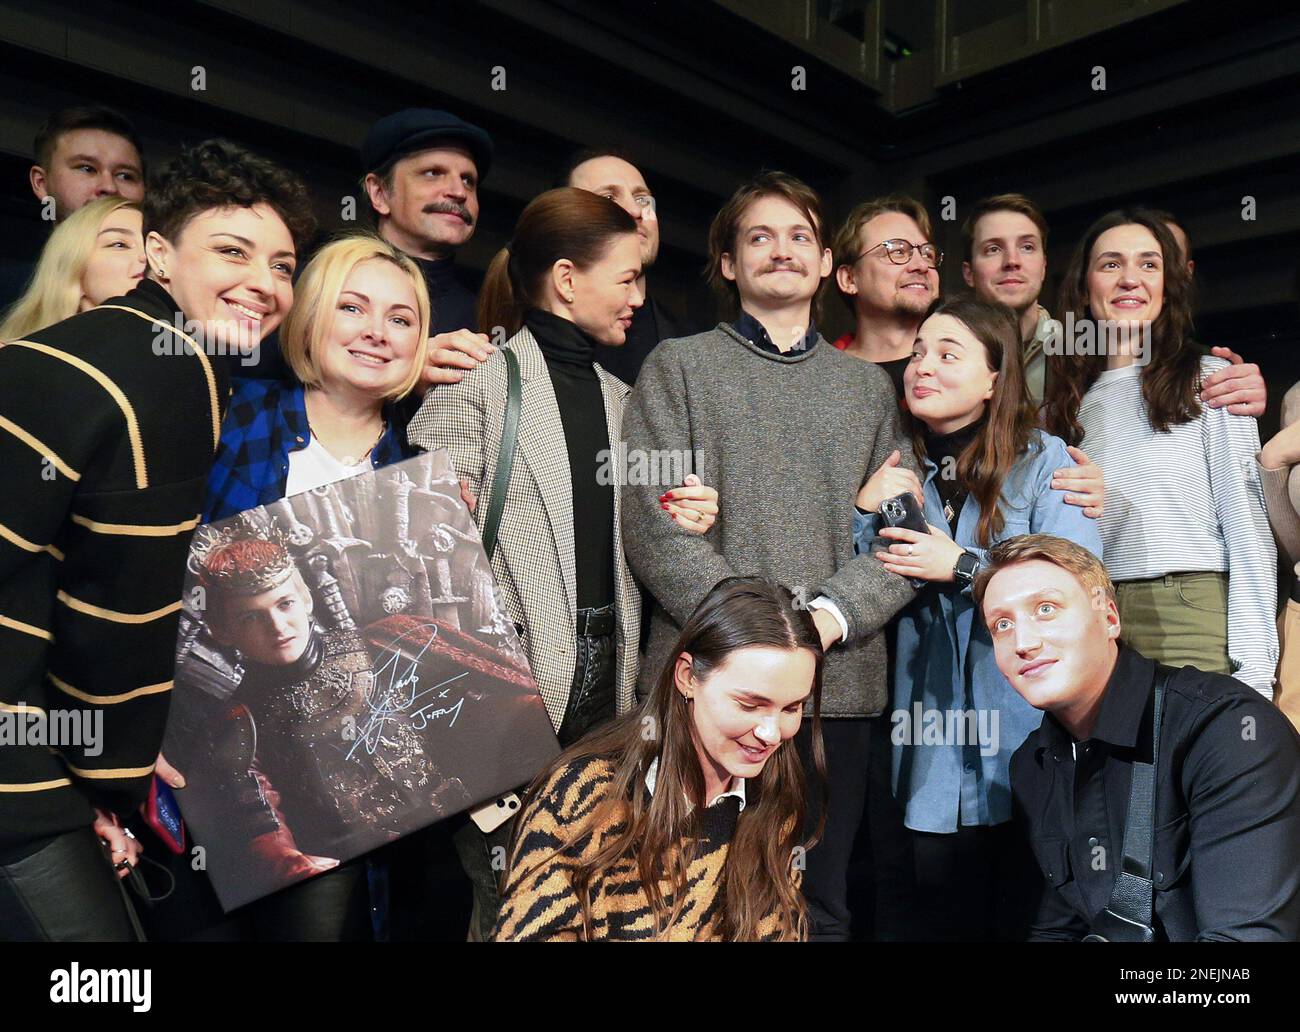 Kyiv, Ukraine 16 February 2023, Actor Jack Gleeson (C) poses for a photo during a meeting with Ukrainian actors at the Kyiv Academic Theater of Young Spectators in Kyiv, Ukraine 16 February 2023, amid Russia's invasion of Ukraine. Irish actor Jack Gleeson, best known for his role as King Joffrey Baratheon in the TV HBO series ''Game of Thrones'', came to Ukraine for several days to meet with fans and support the Ukrainian military, according to media. He along with his friends, brought a pickup truck, which was purchased by British volunteers for the Armed Forces of Ukraine, according to media Stock Photo